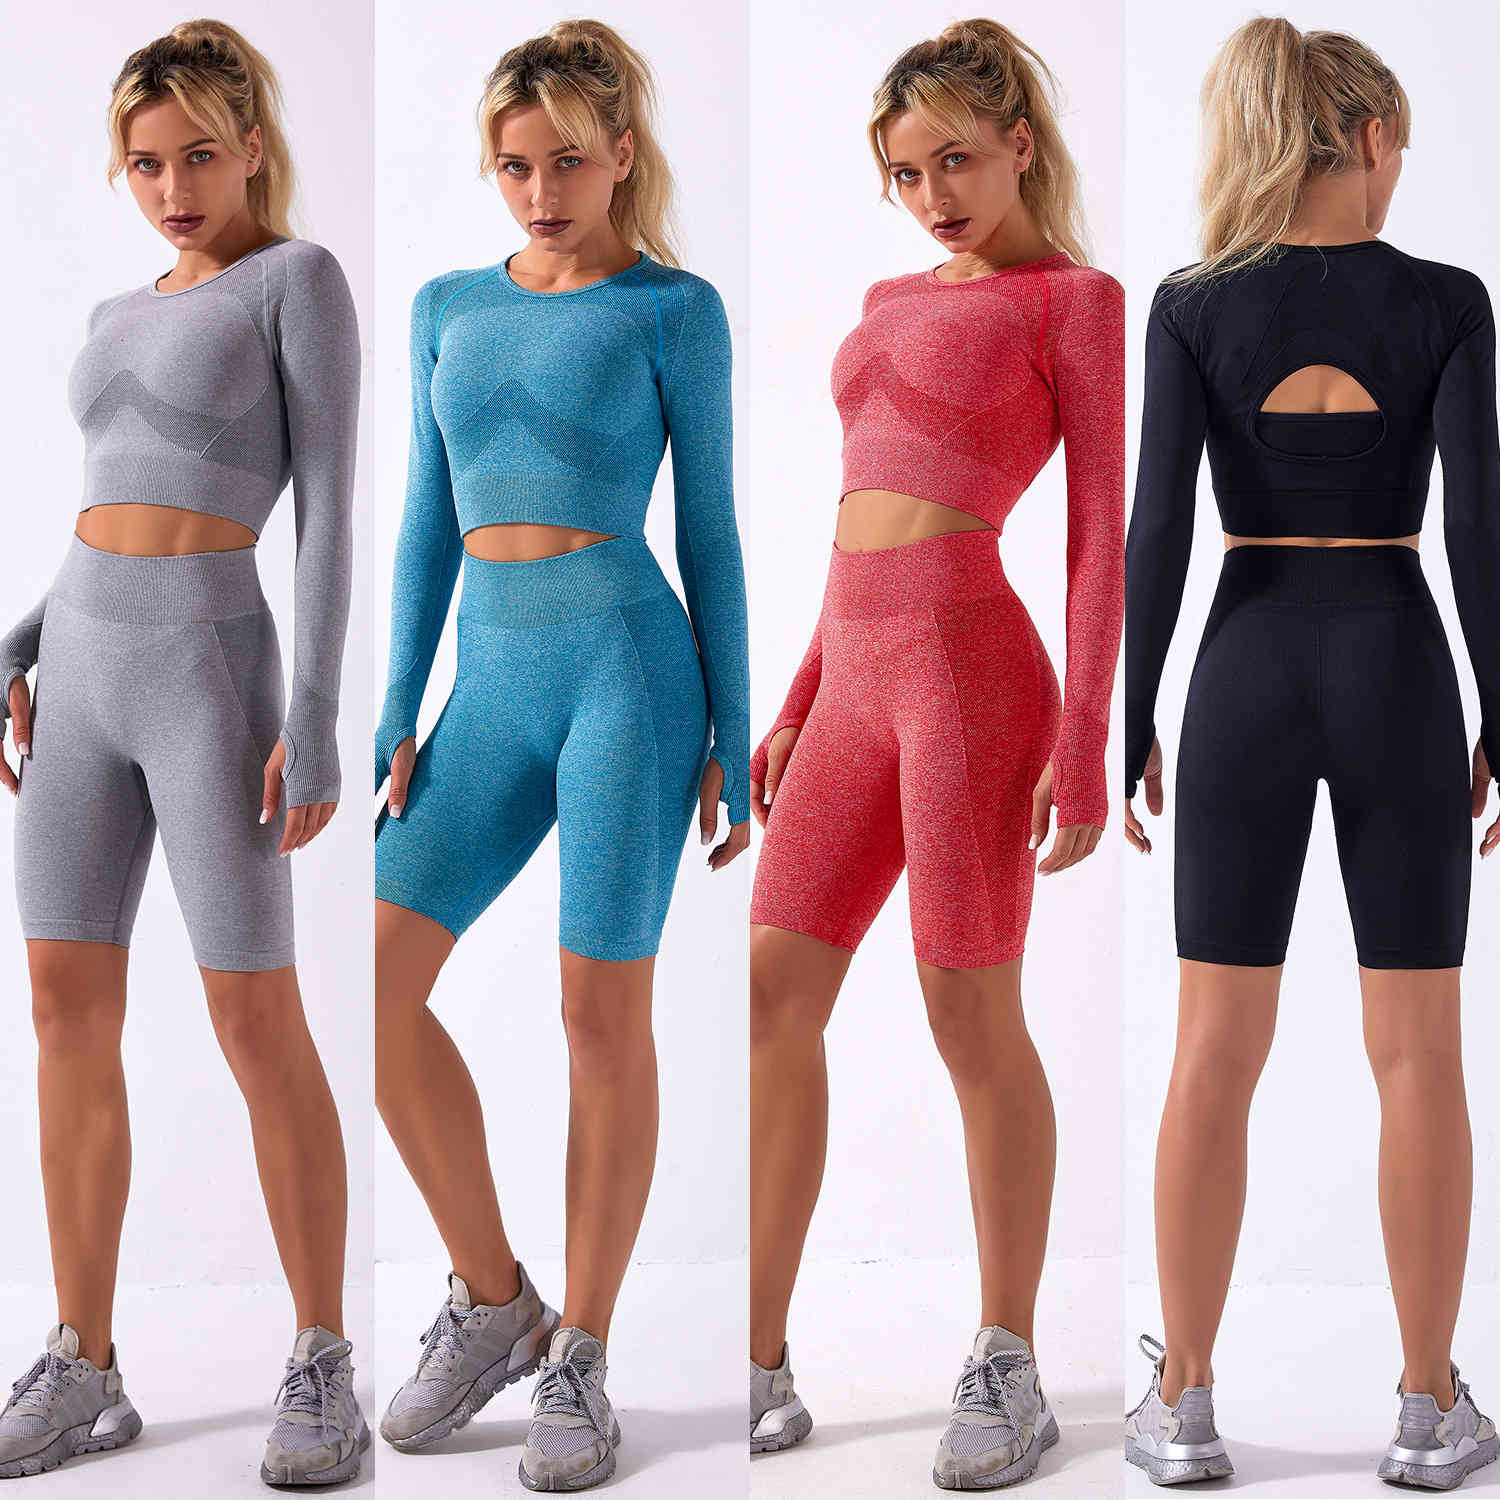 

Outdoor Indoor Exercise Fitness Suit2021 shark knitted seamless Yoga suit two piece set explosive lift breathable hip High Waist Shorts, Long sleeve + shorts sky blue